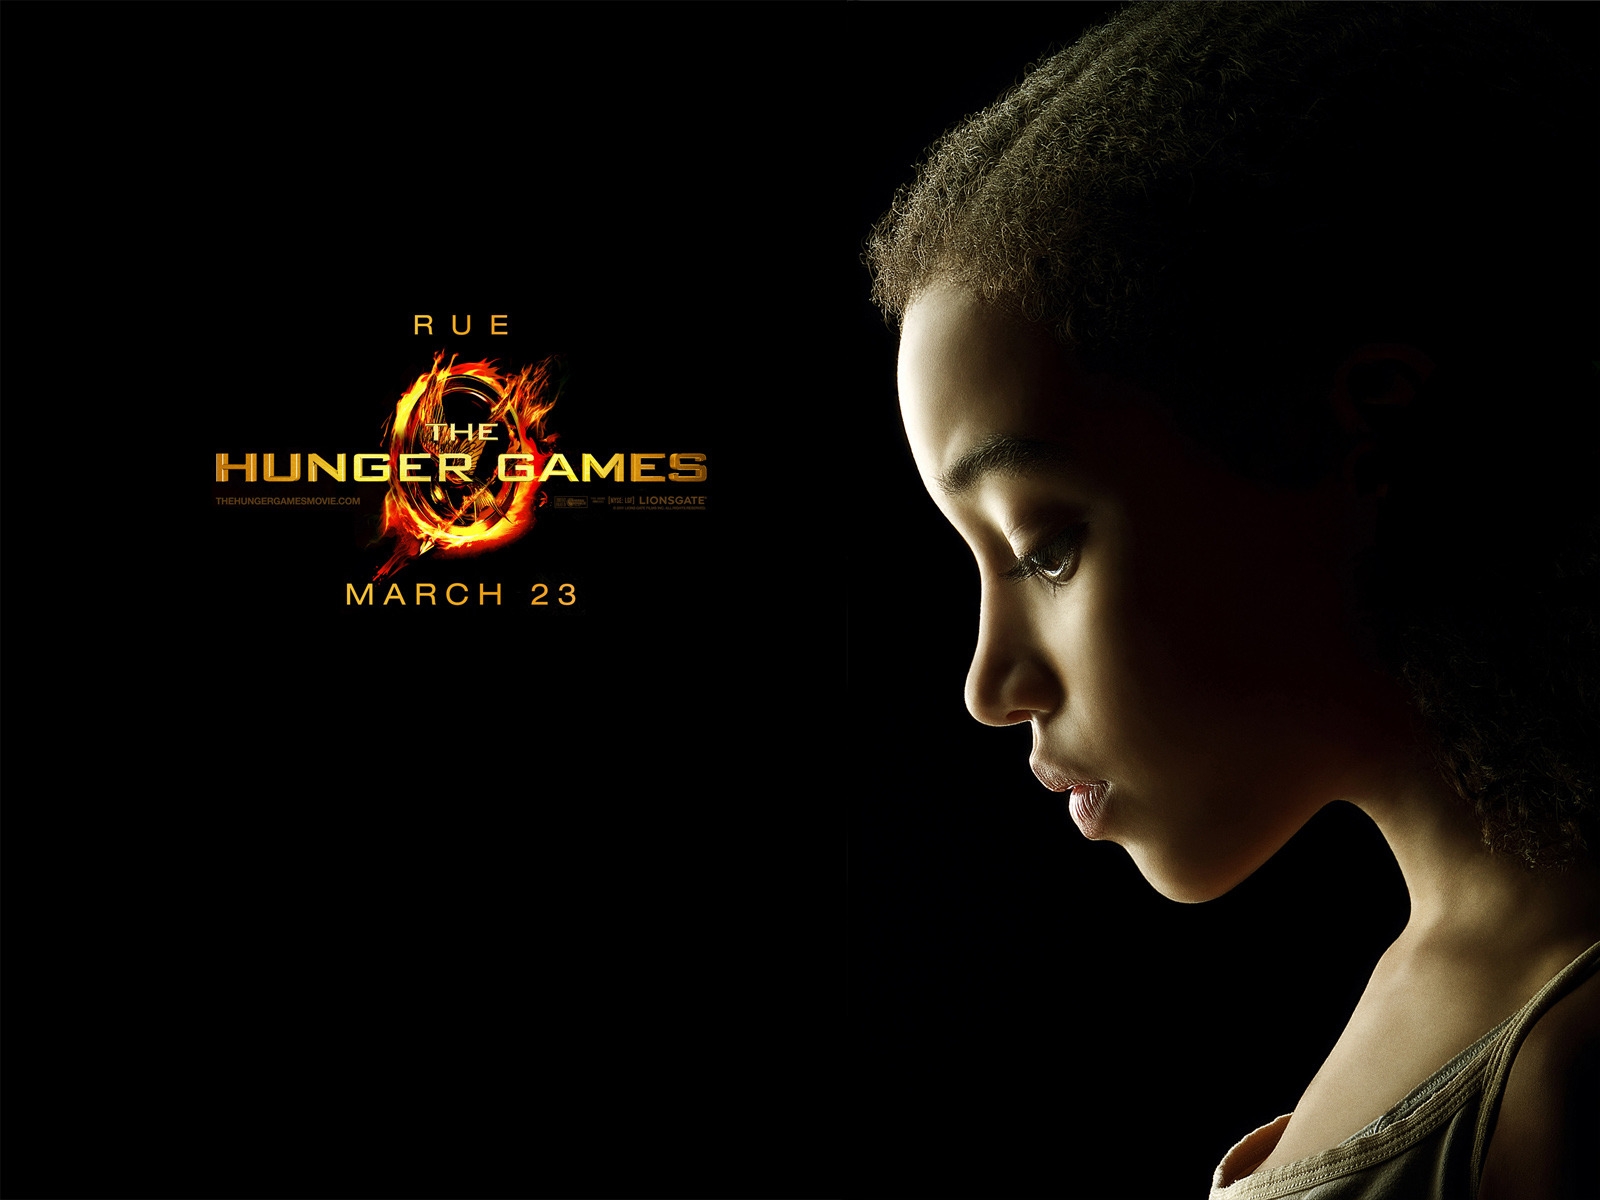 The Hunger Games Rue for 1600 x 1200 resolution